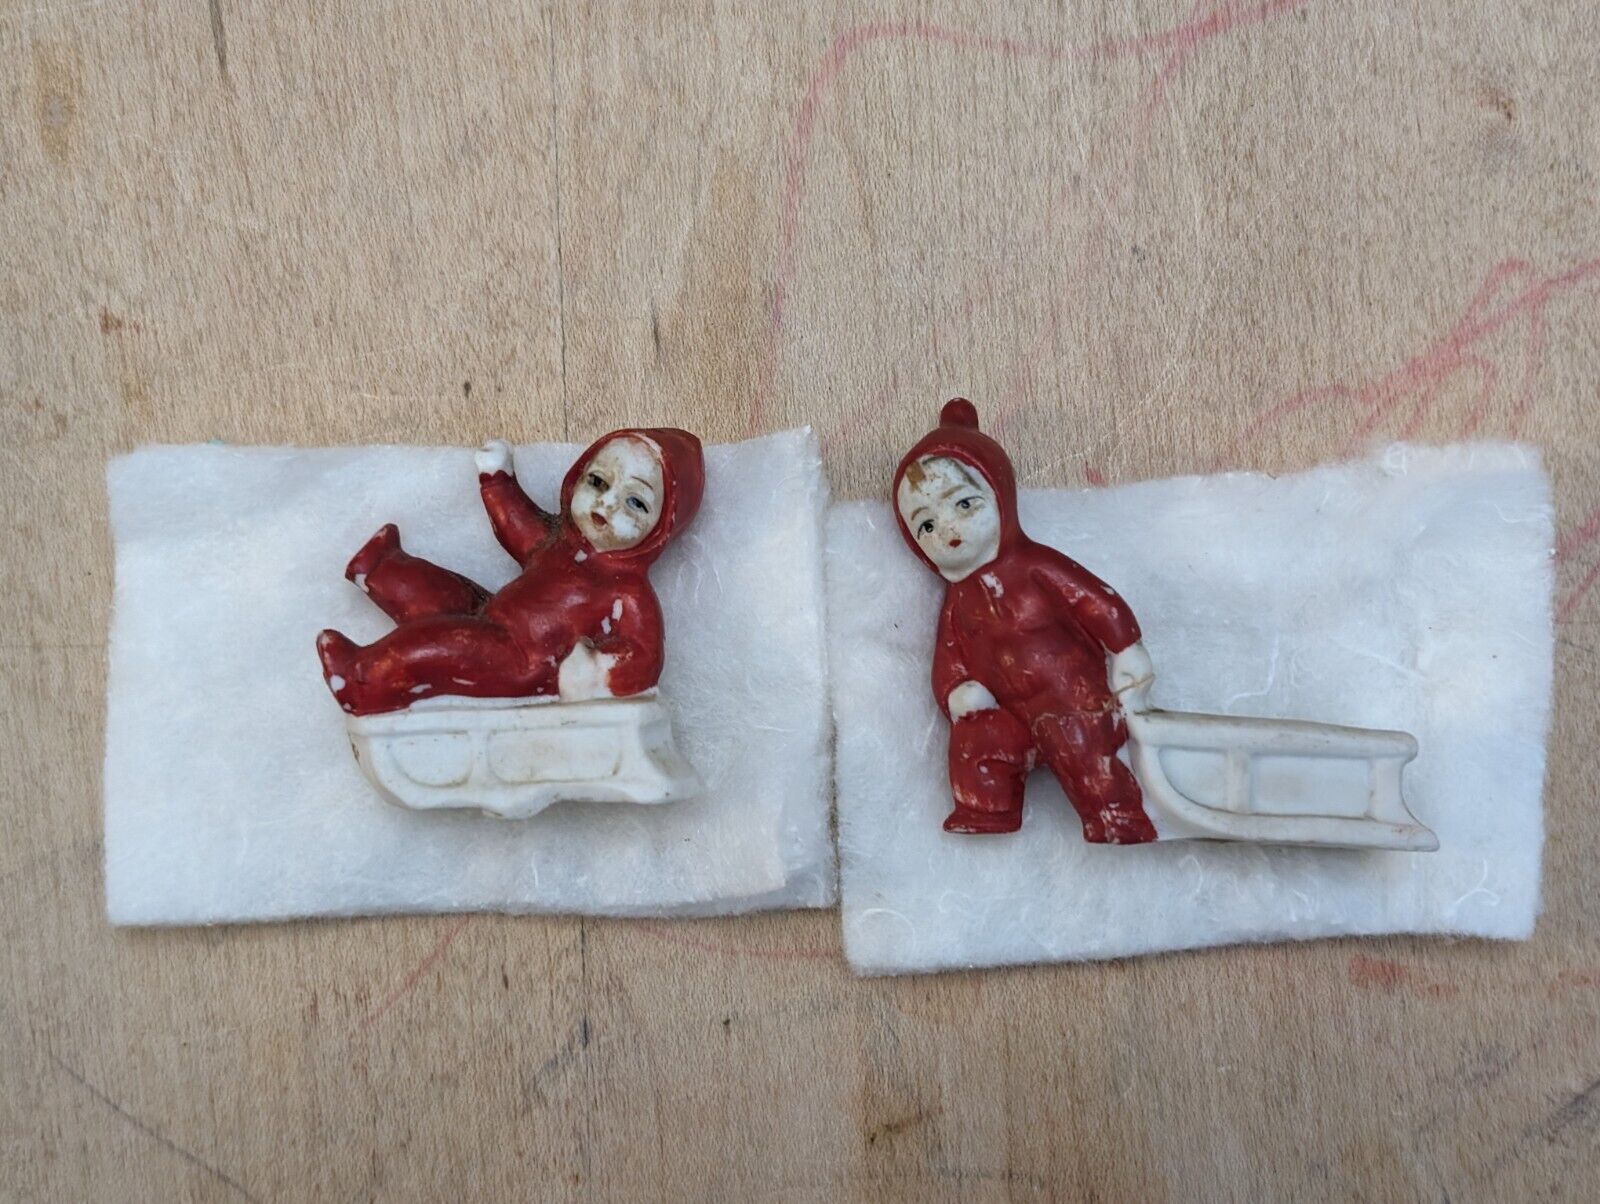 Kitsch German Bisque Snowbabies With Sleds Small Porcelain Antique Red White 